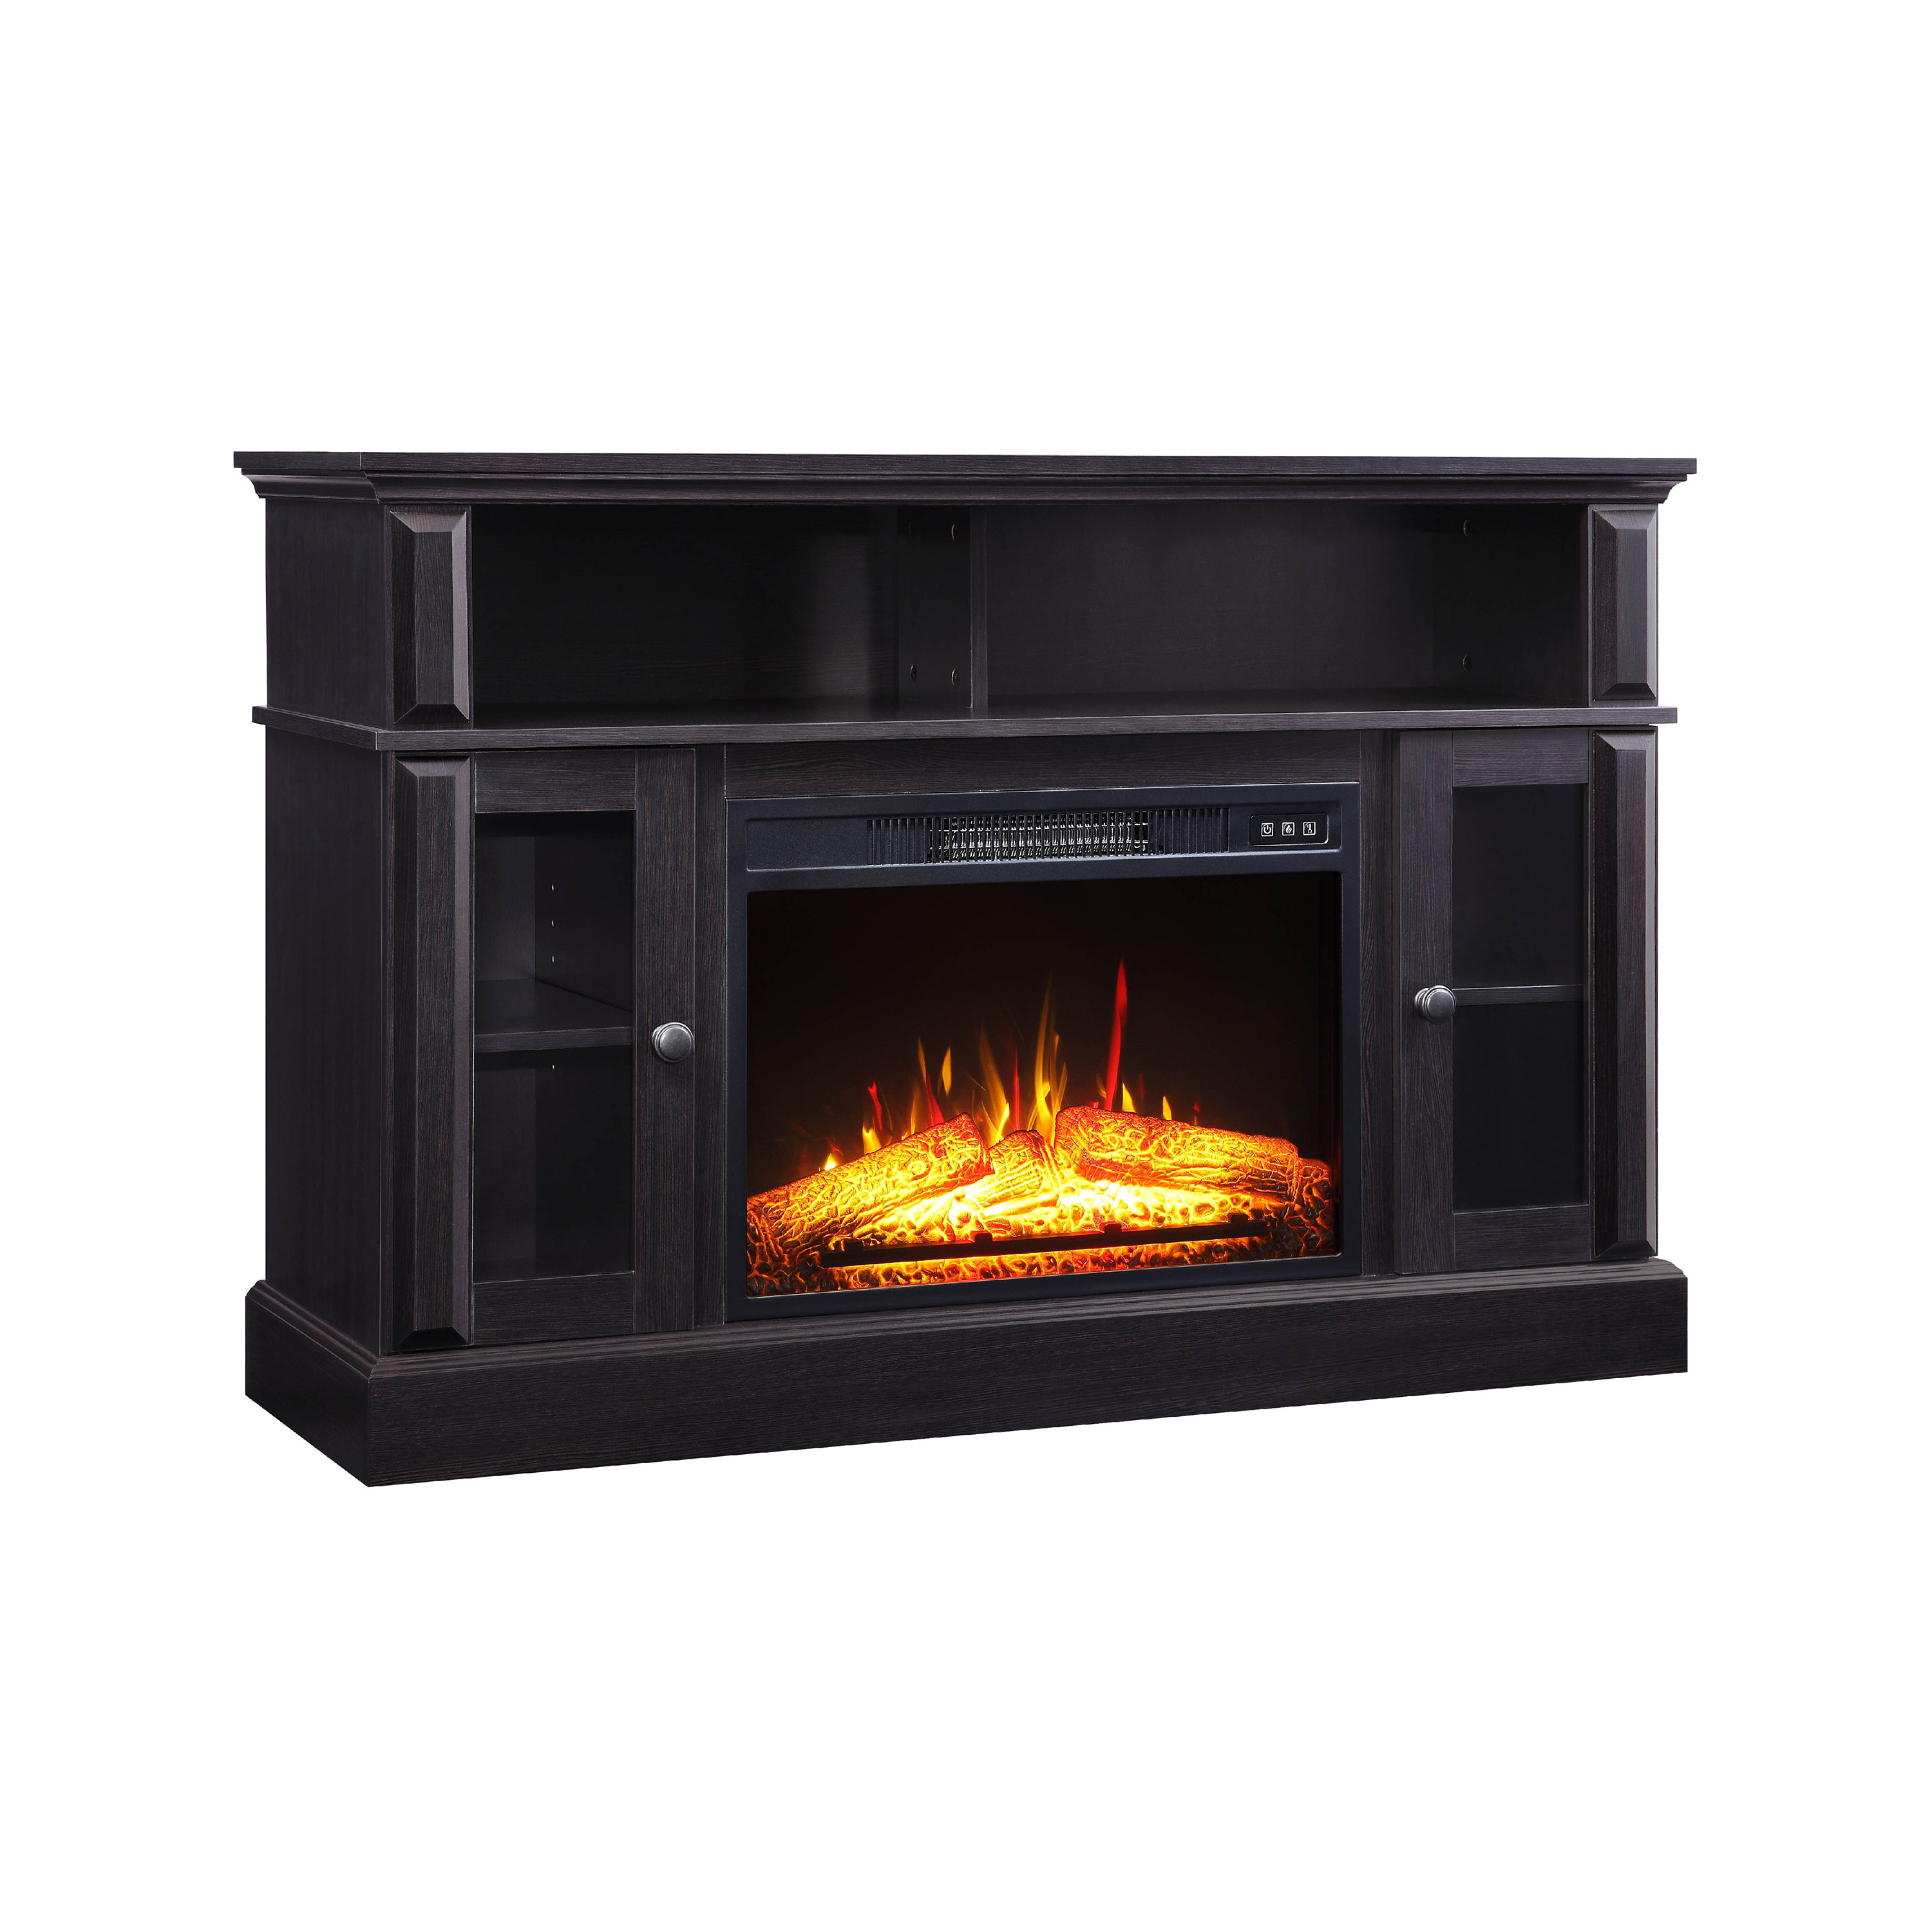 Whalen Barston Media Fireplace Console for TV's up to 55”, Espresso Finish - image 5 of 11